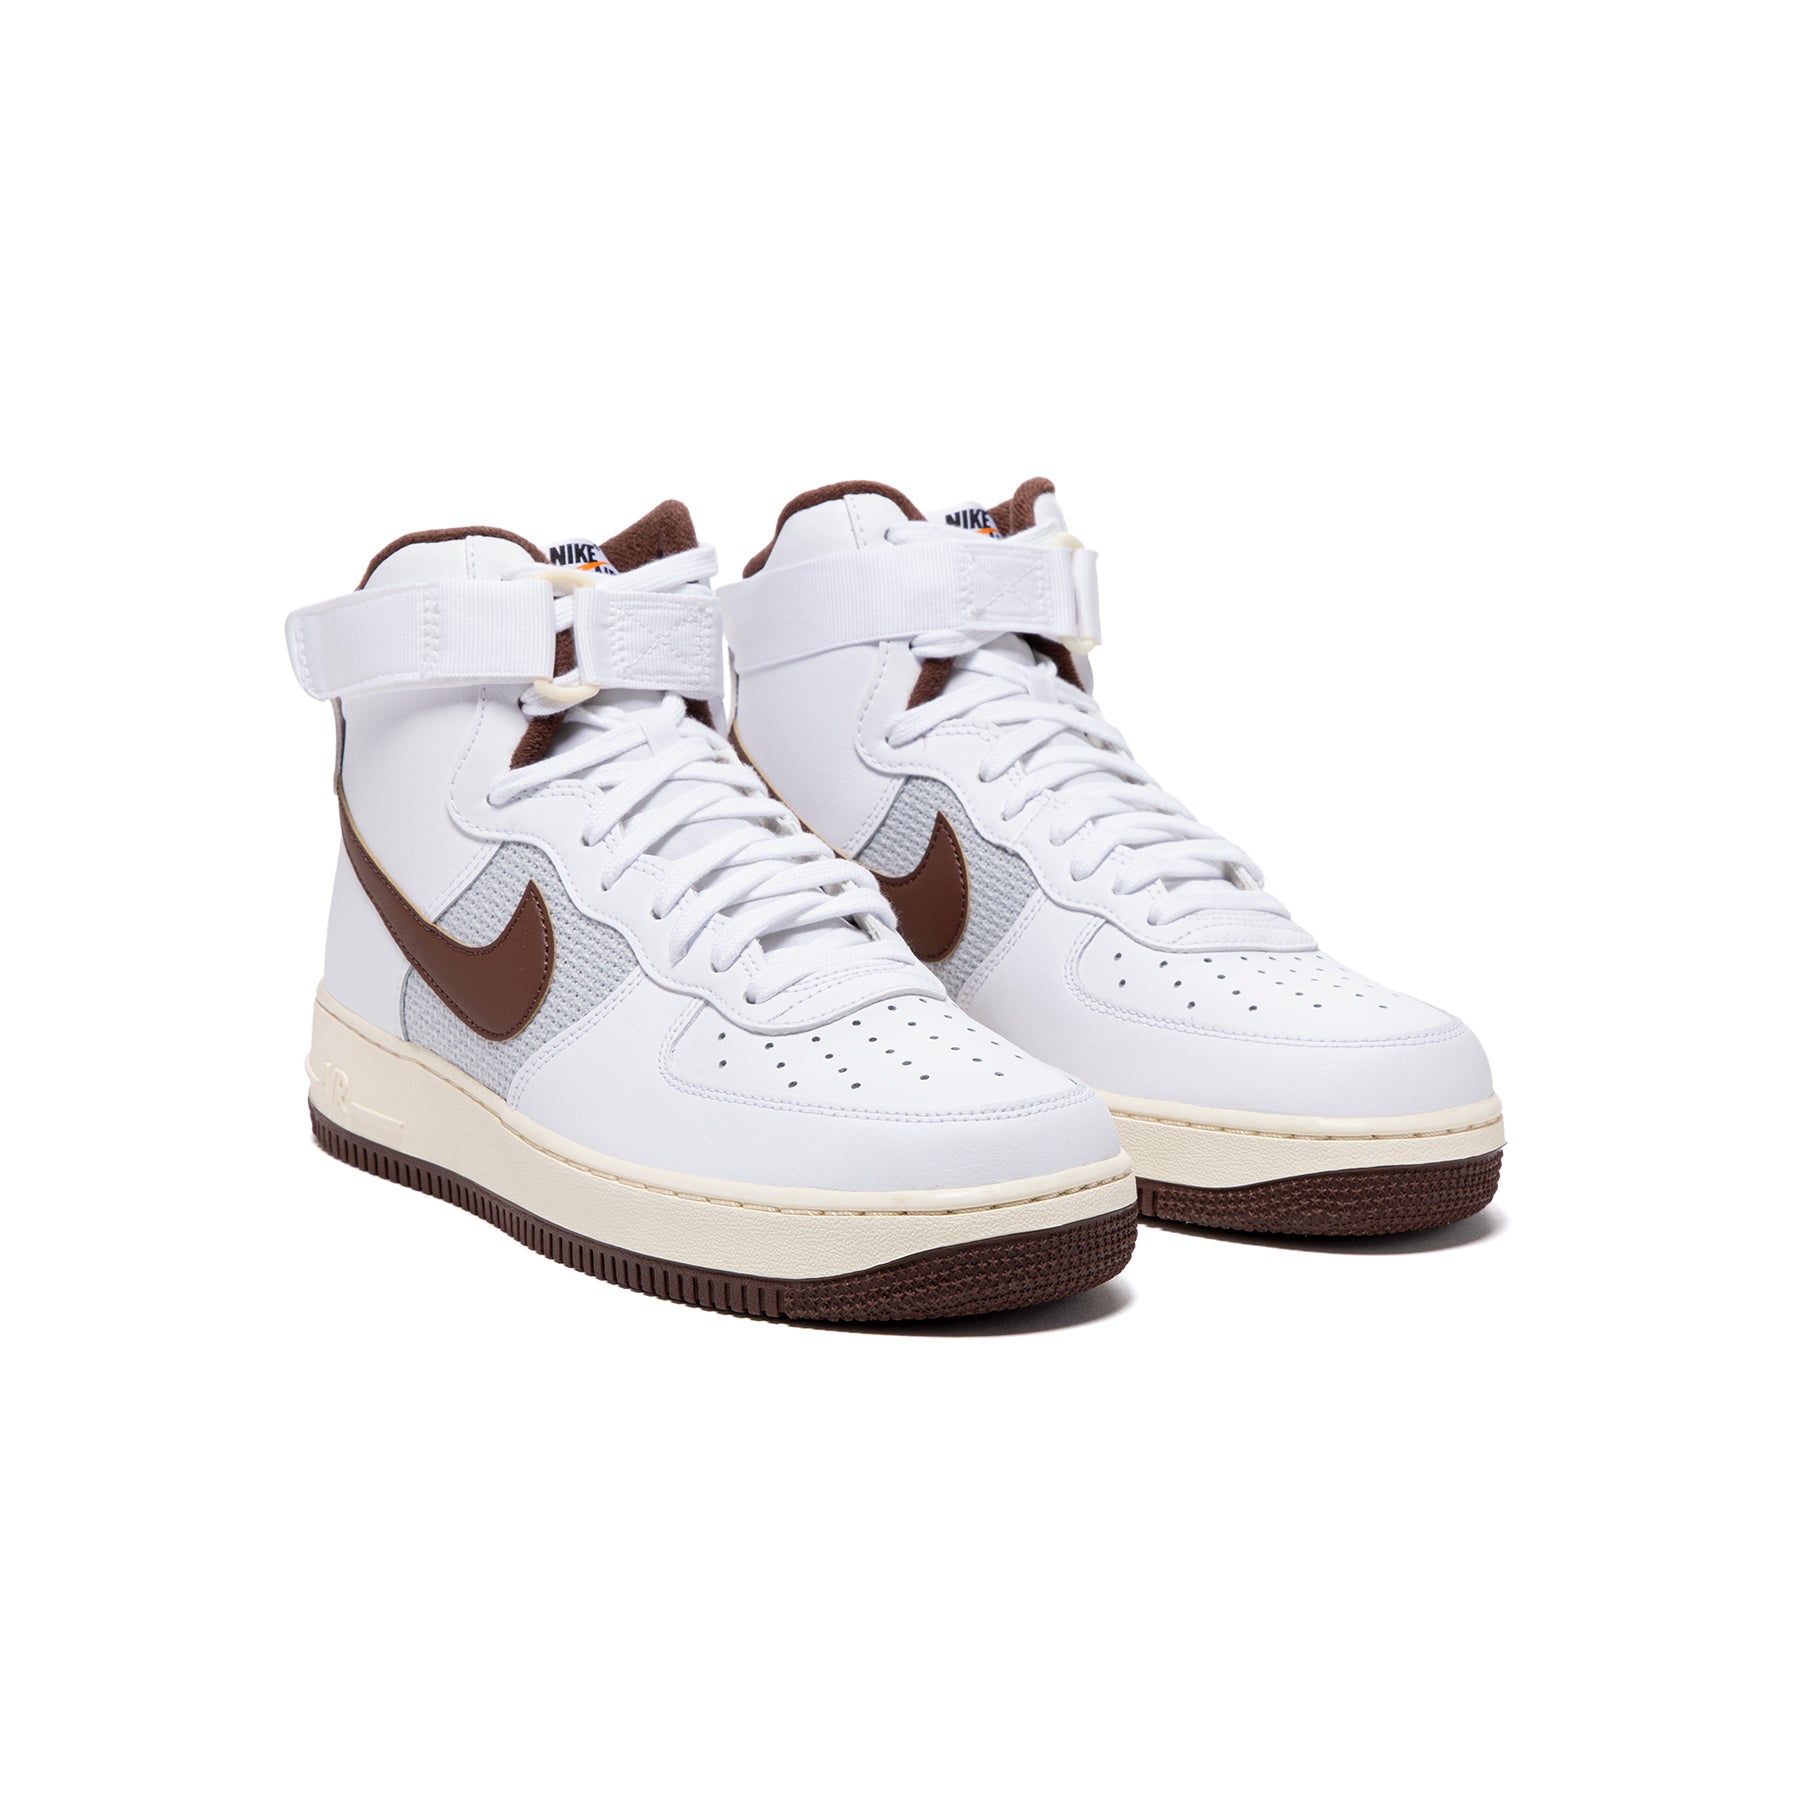 Nike Air Force 1 High '07 LV8 White Brown DM0209-101 Men's Size 9.5 Shoes  #17A